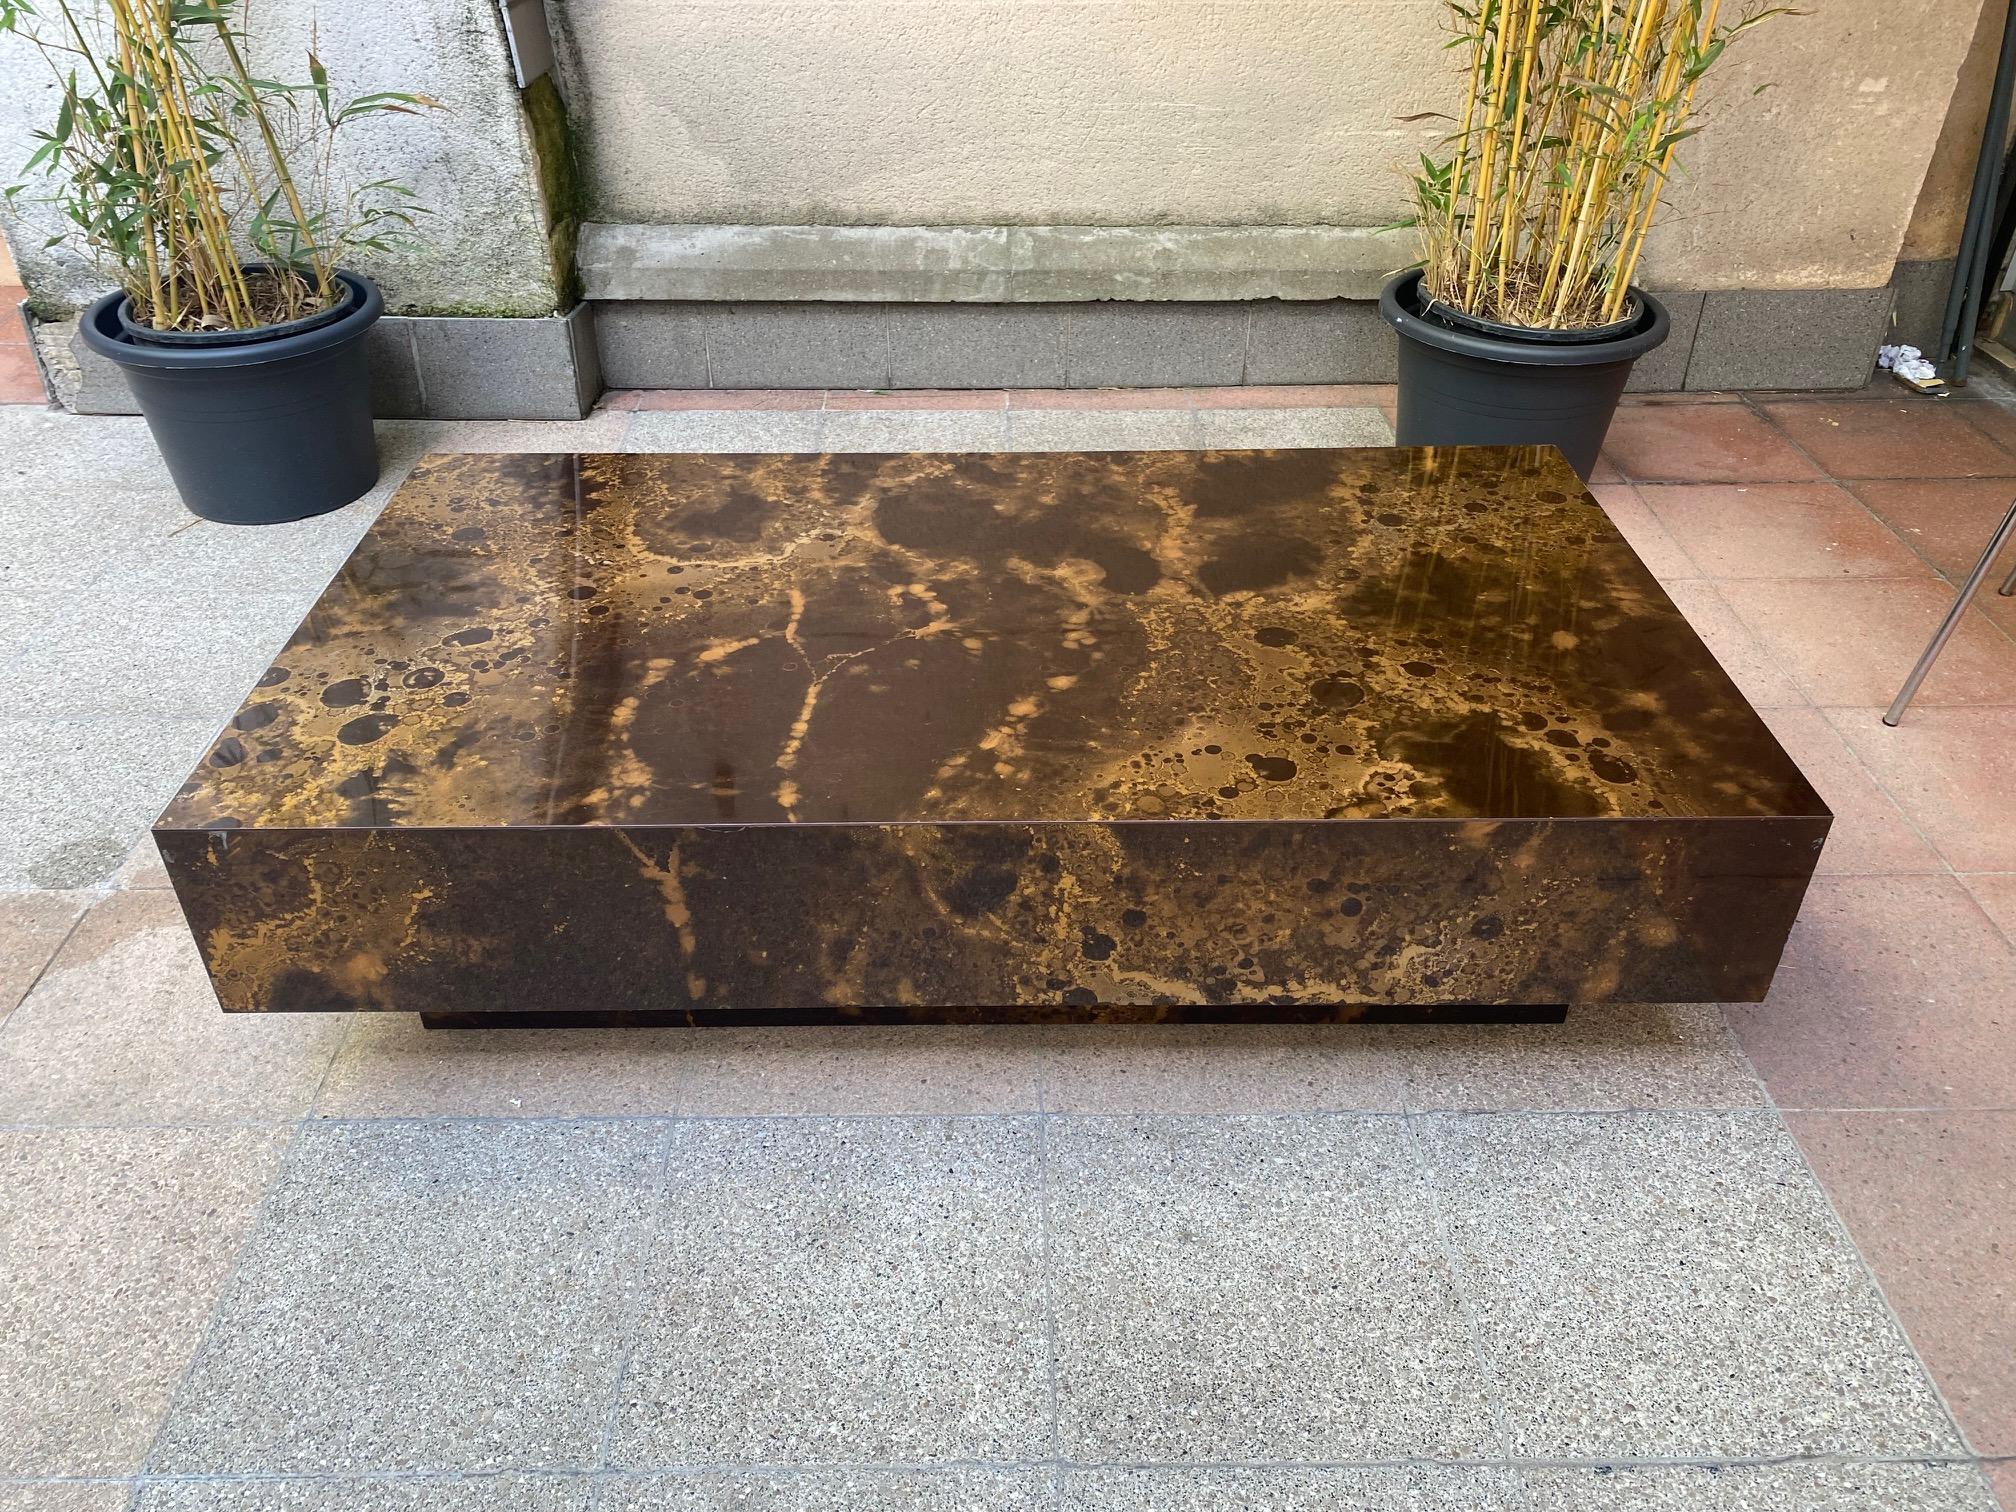 Late 20th Century Guy lefevre For Roche Bobois  Solar flare coffee table  Wood/ lacquered melamine